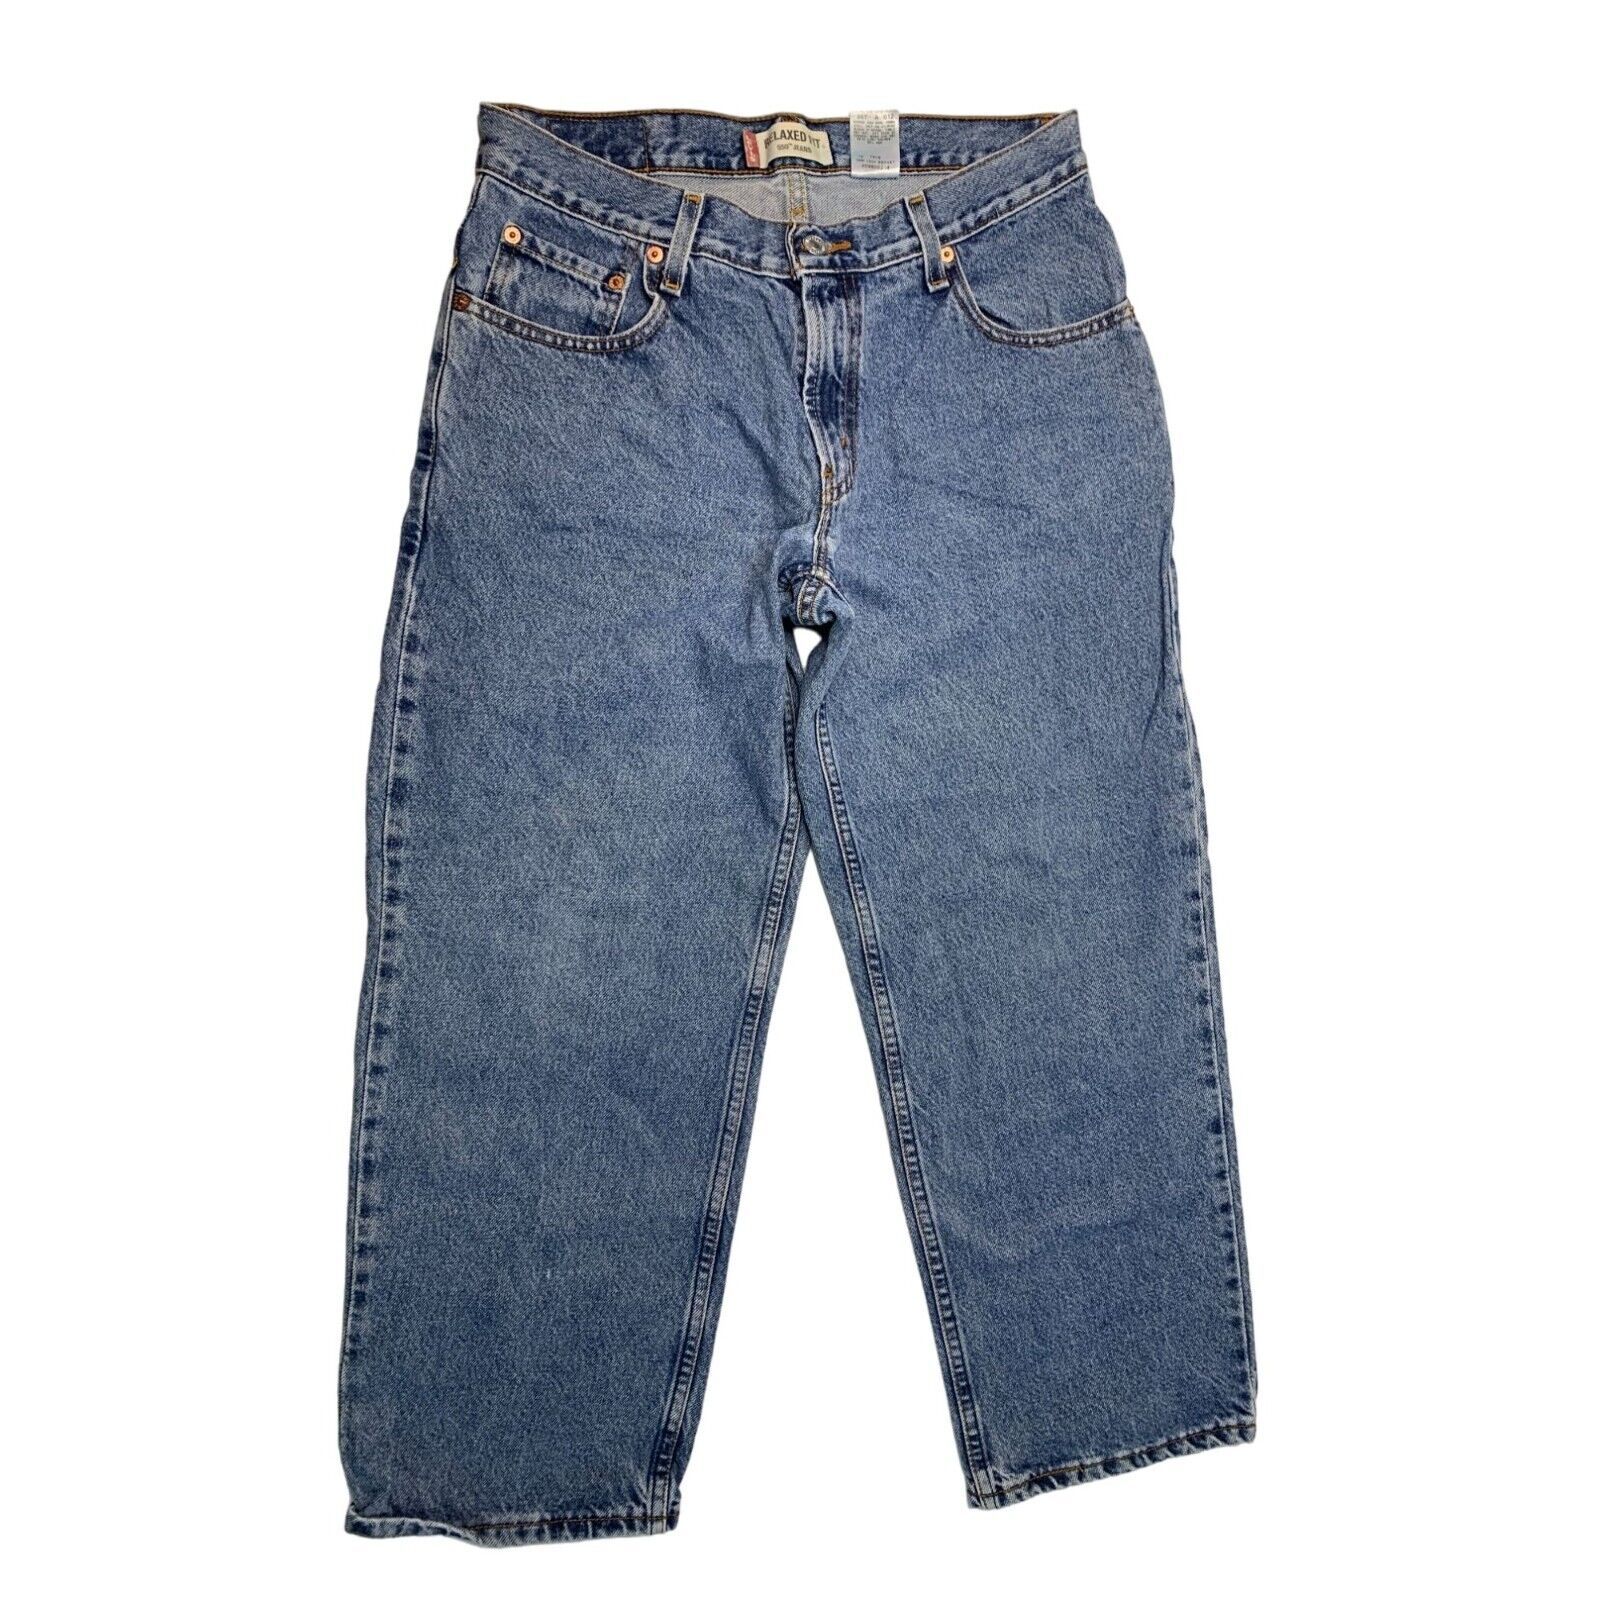 Primary image for Levis 550 Boys Size 12 H W 32 I 27 Light Wash Jeans Relaxed Fit Jeans